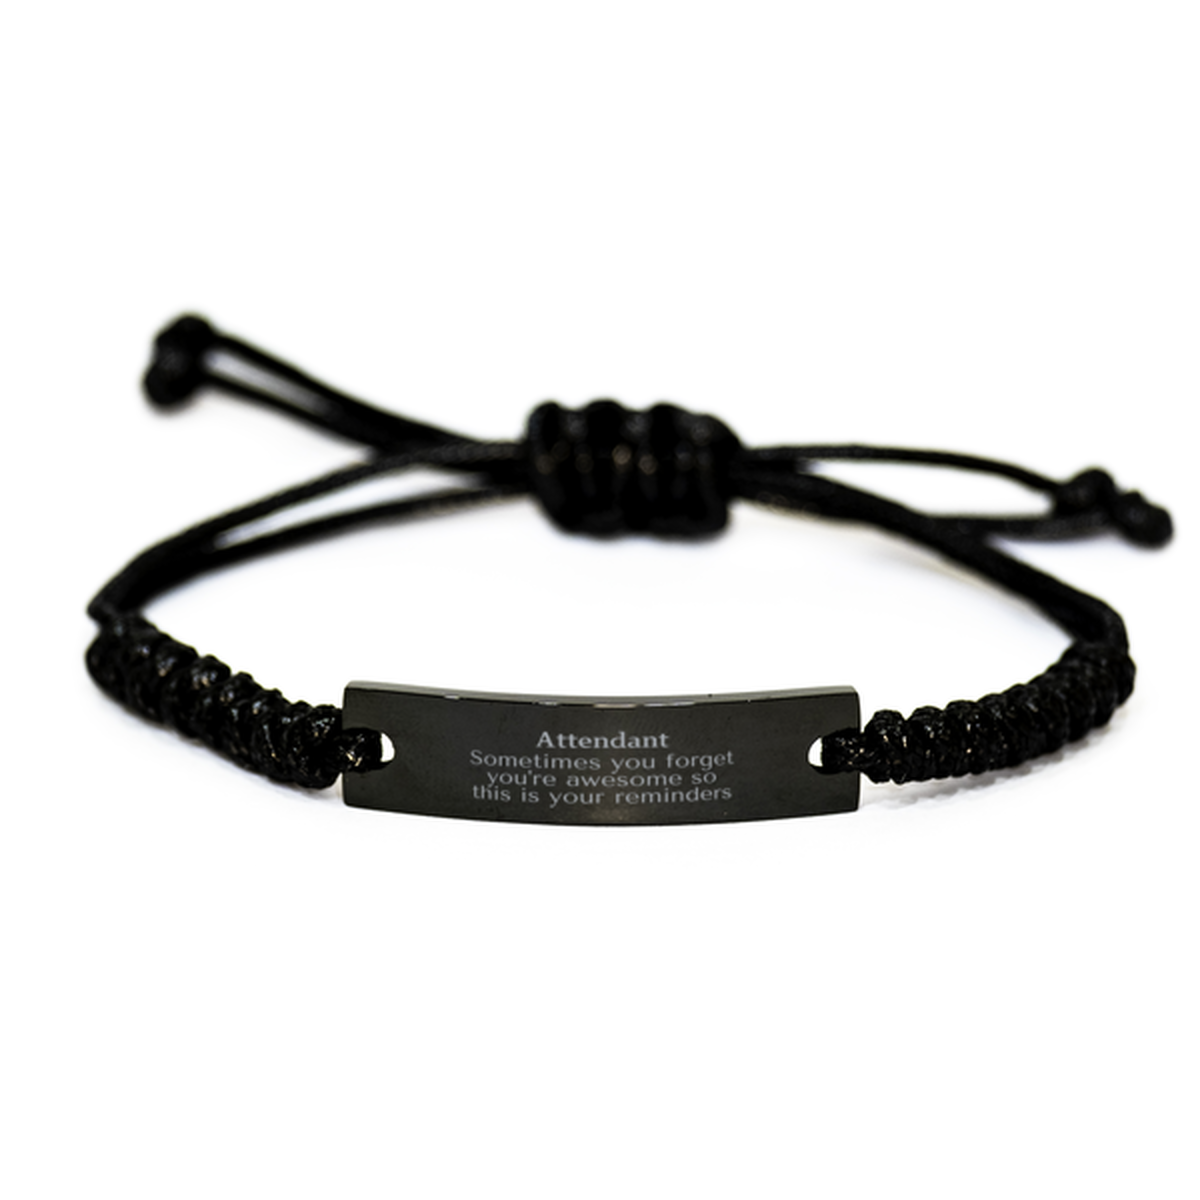 Sentimental Attendant Black Rope Bracelet, Attendant Sometimes you forget you're awesome so this is your reminders, Graduation Christmas Birthday Gifts for Attendant, Men, Women, Coworkers